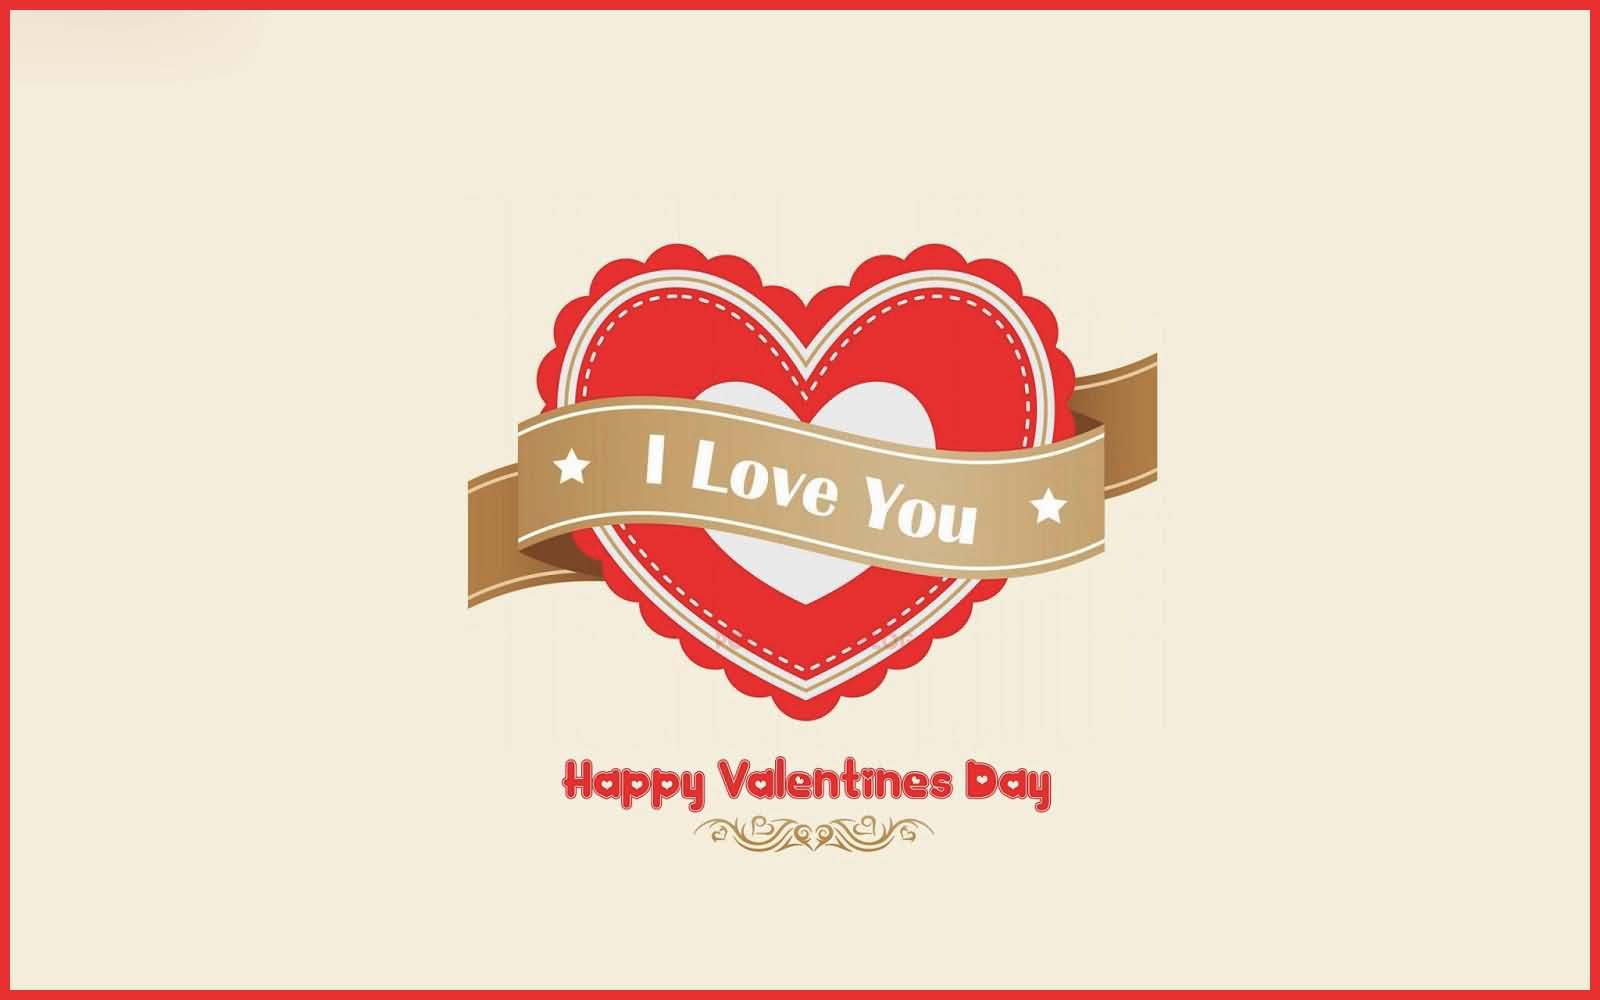 I Love You heart to wish you Happy Valentines Day wallpaper